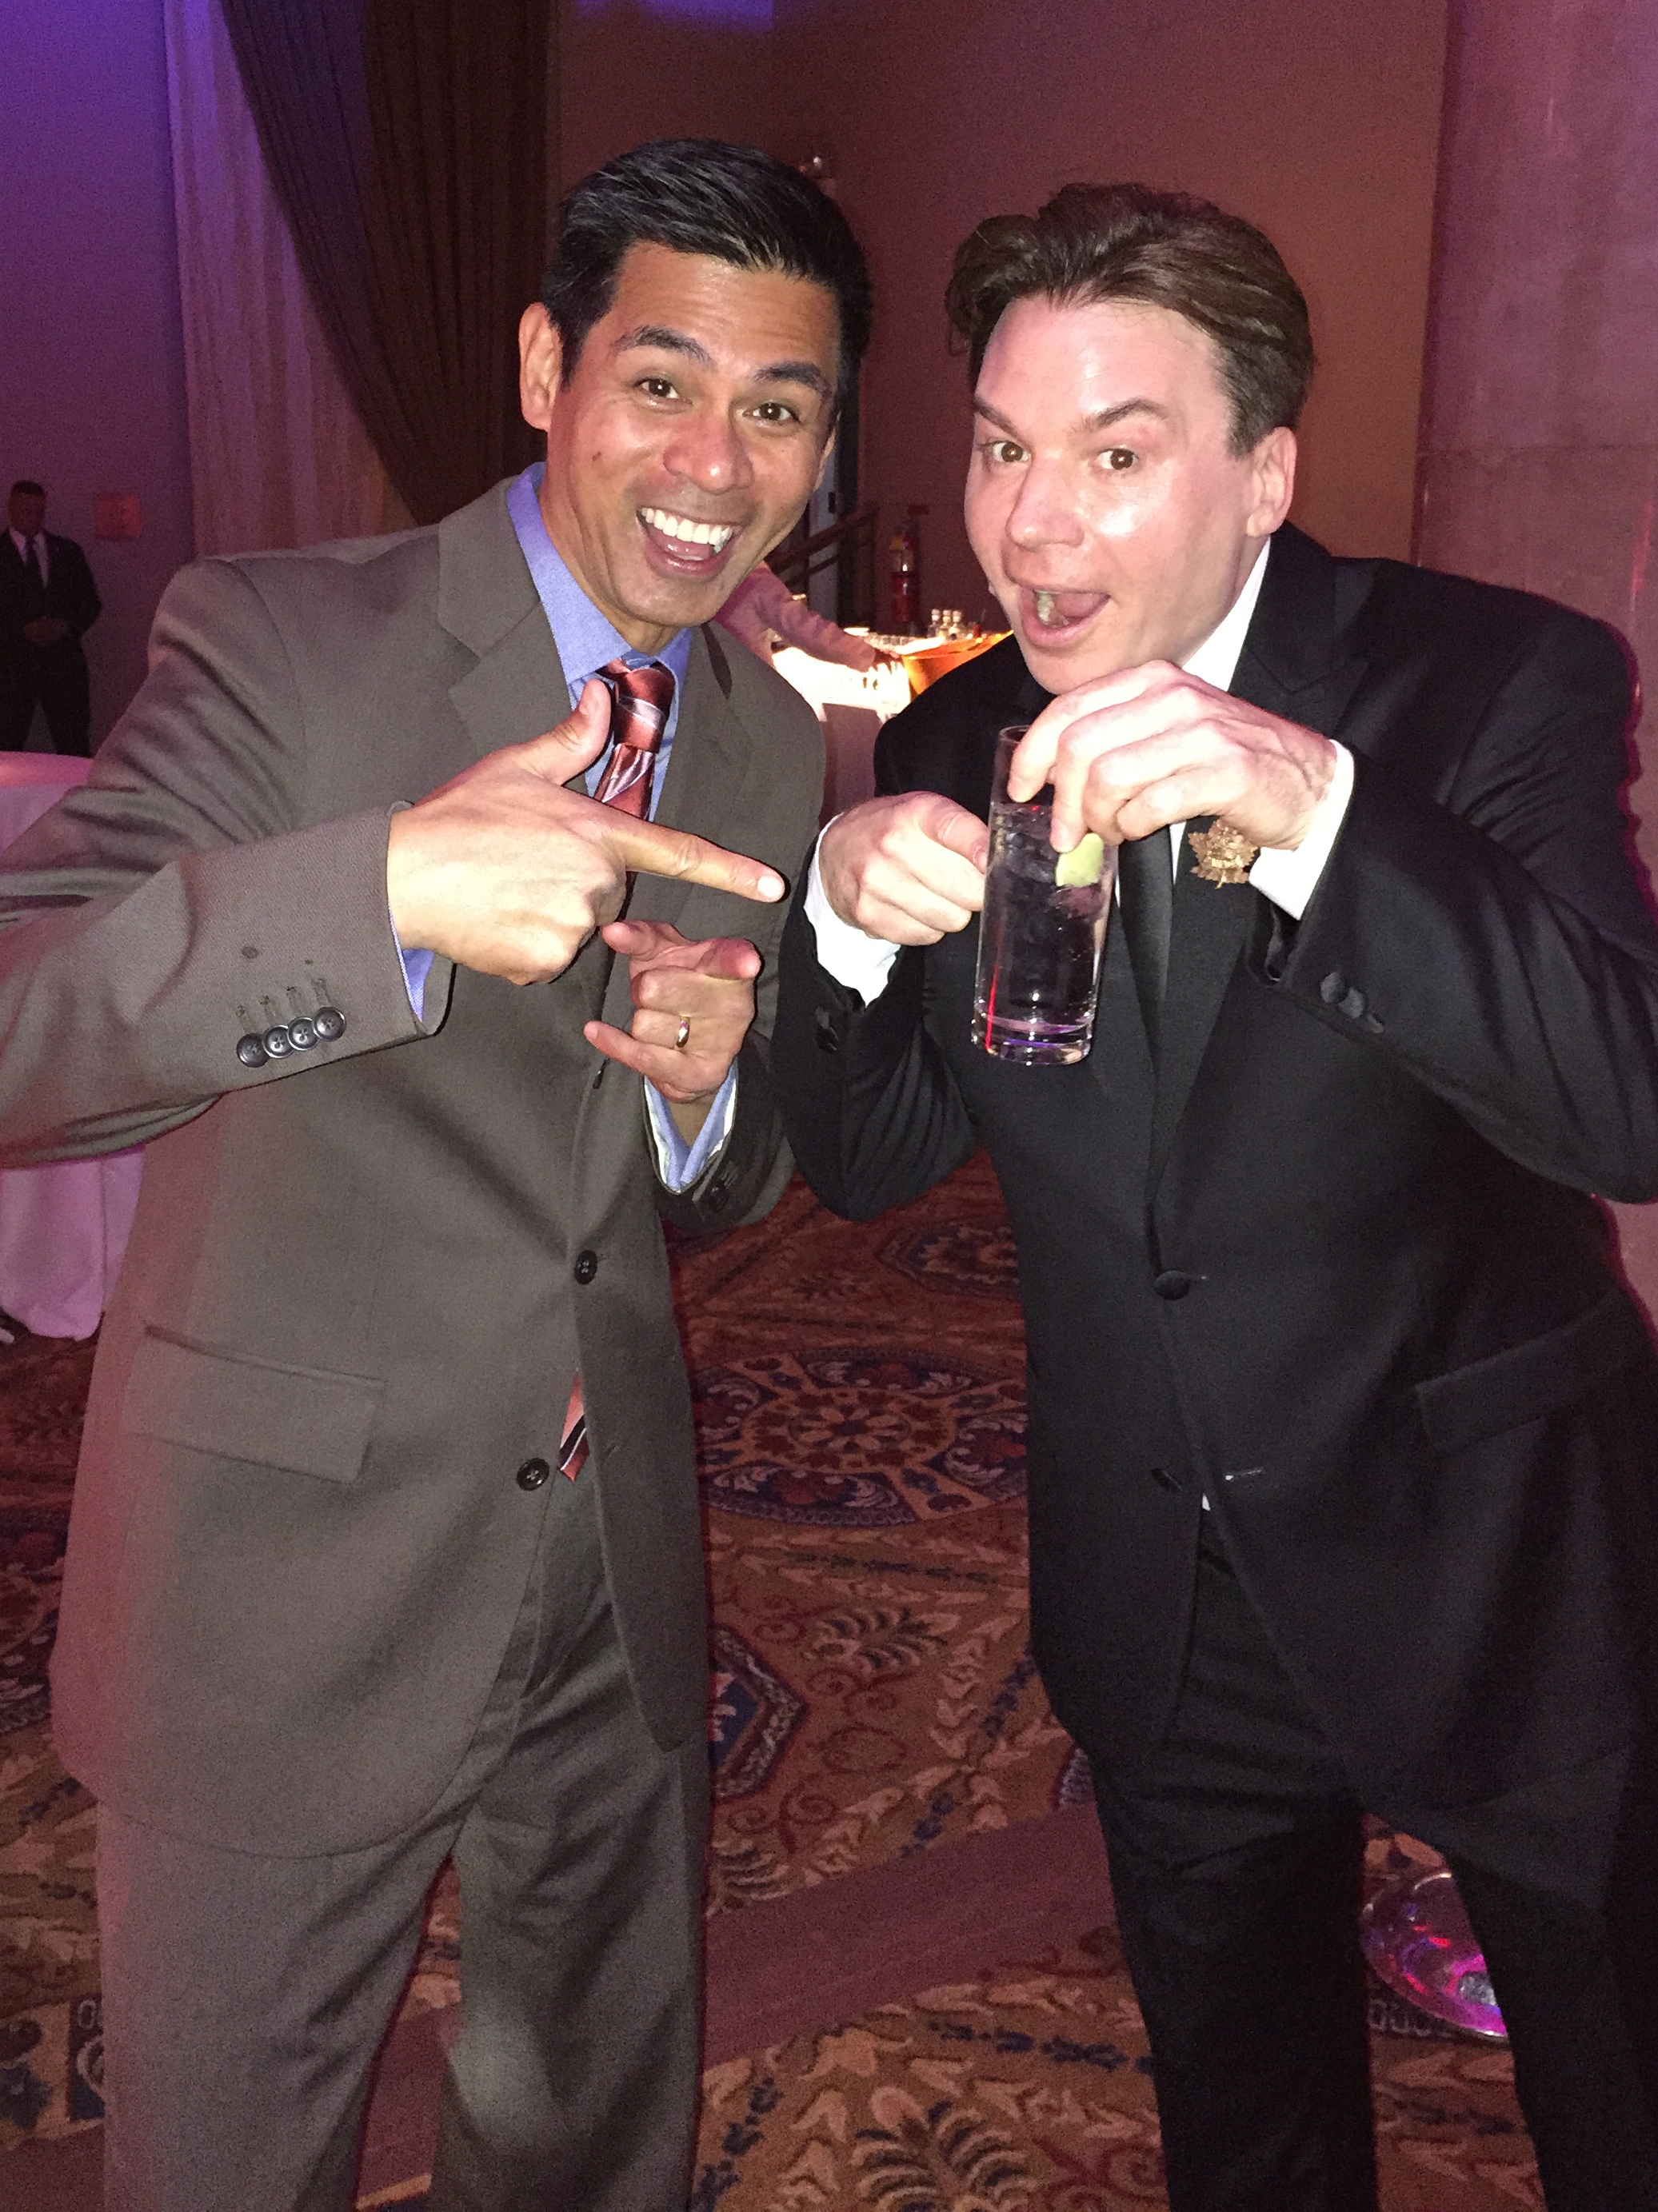 Having fun with Mike Myers, Canadian actor, comedian, screenwriter, and film producer at Elton John AIDS Foundation Gala in NYC